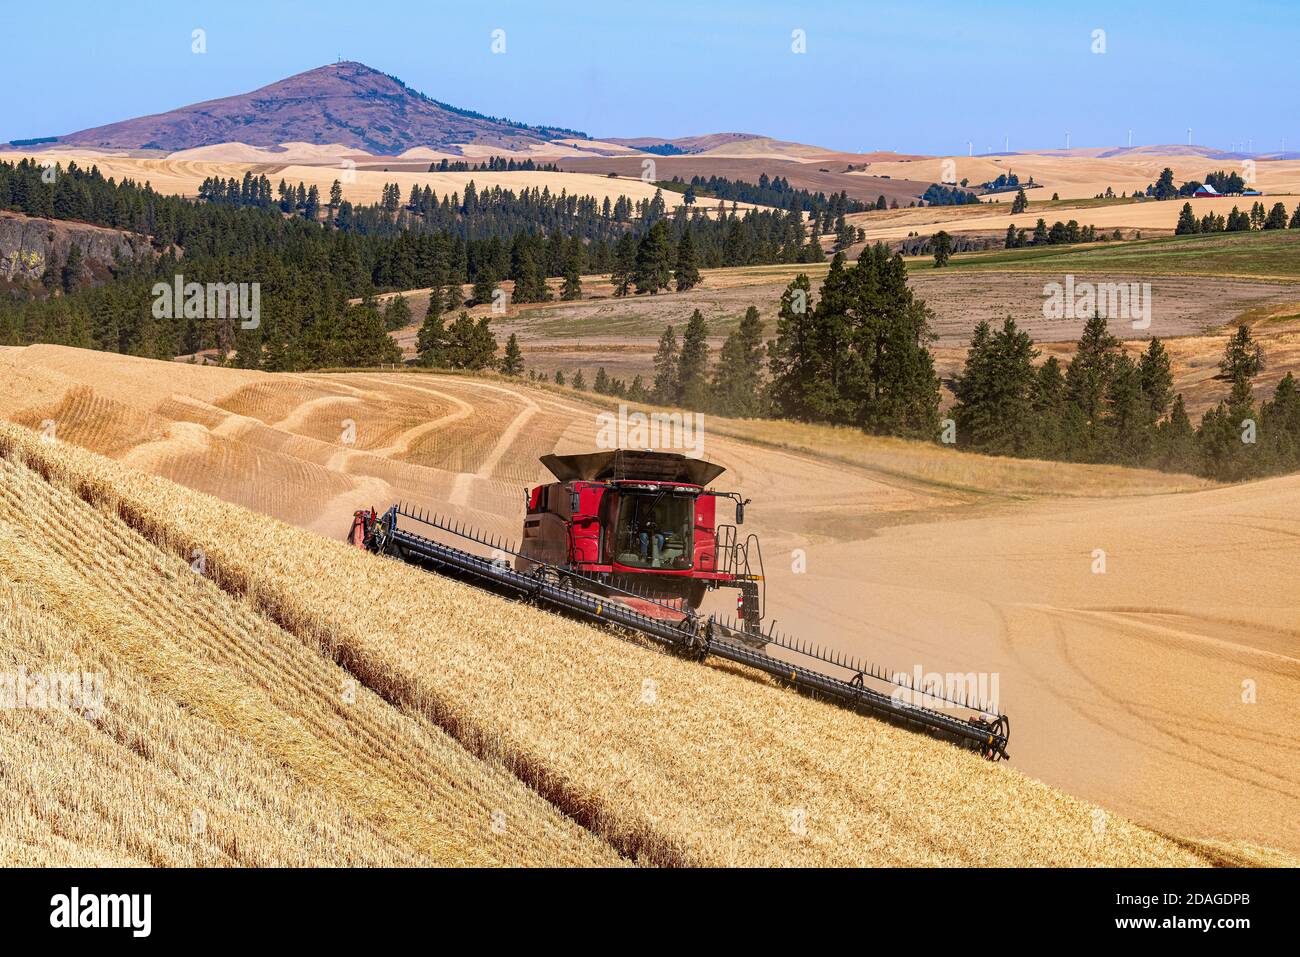 CaseIH combine harvesting wheat on the hills of the Palouse Region of Eastern Washington with Steptoe Butte in the background Stock Photo